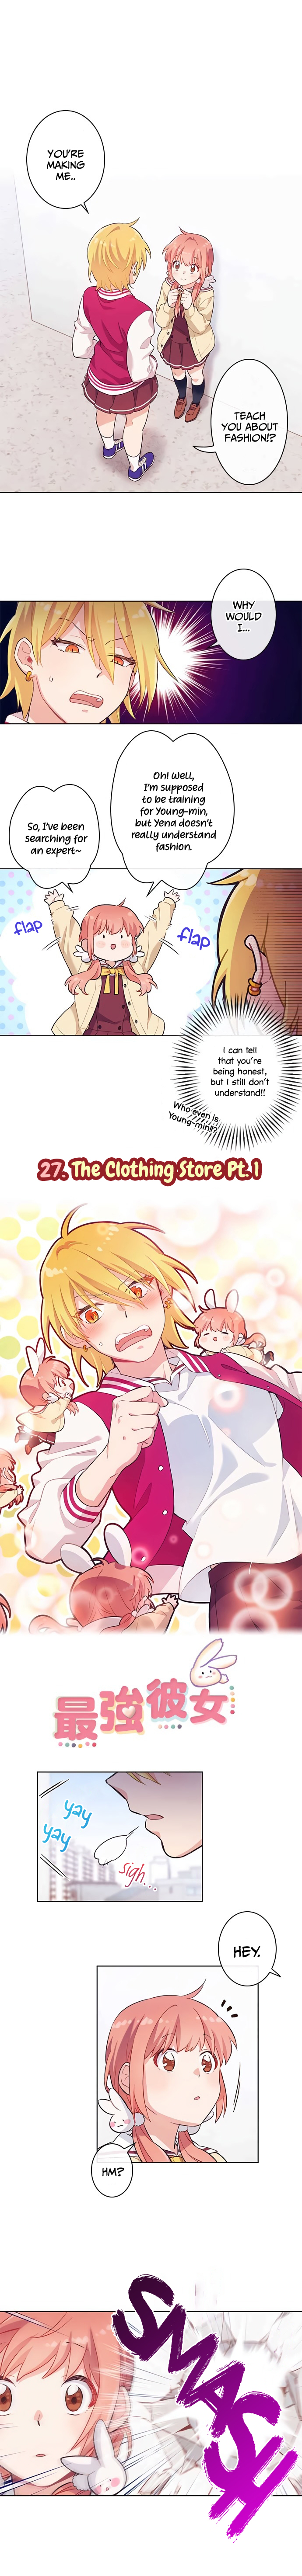 The Strongest Girl Ch. 27 The Clothing Store pt. 1